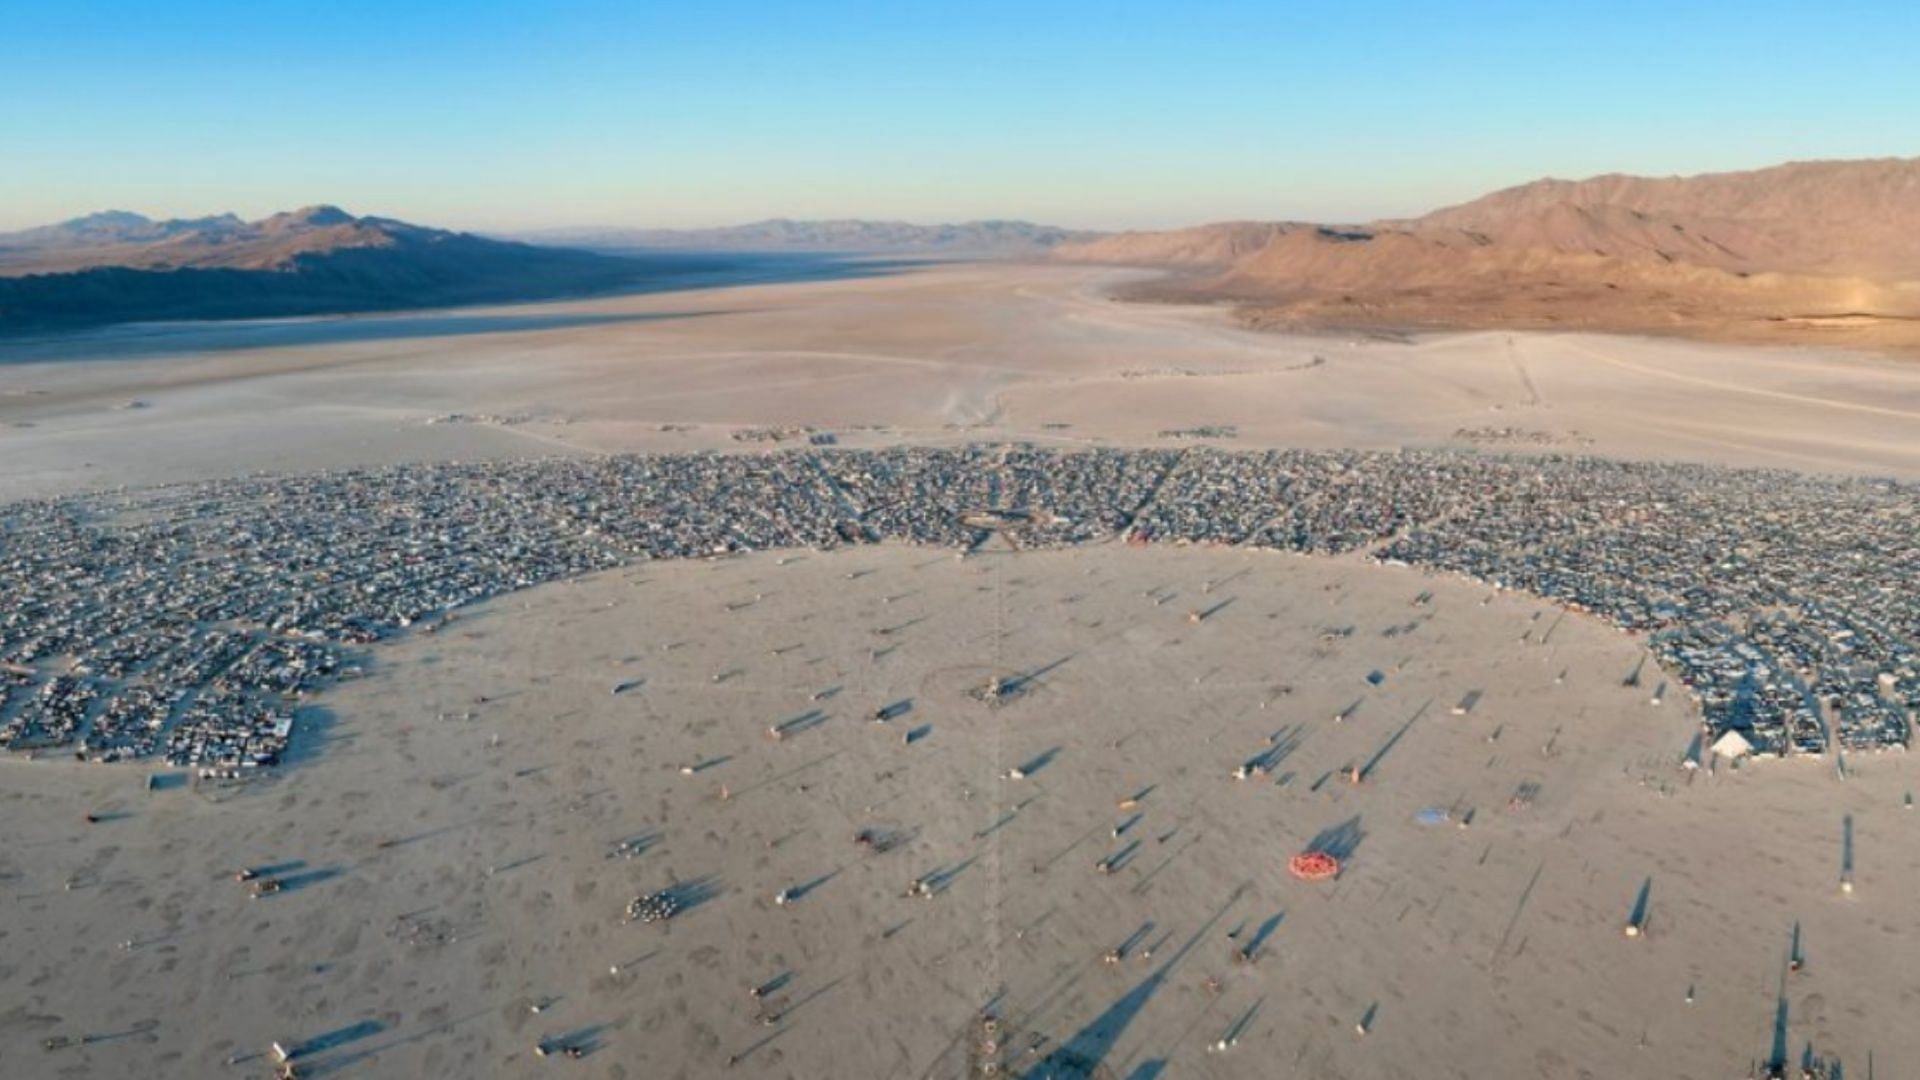 Fact Check Is FEMA at Burning Man? Lockdown over mysterious sickness